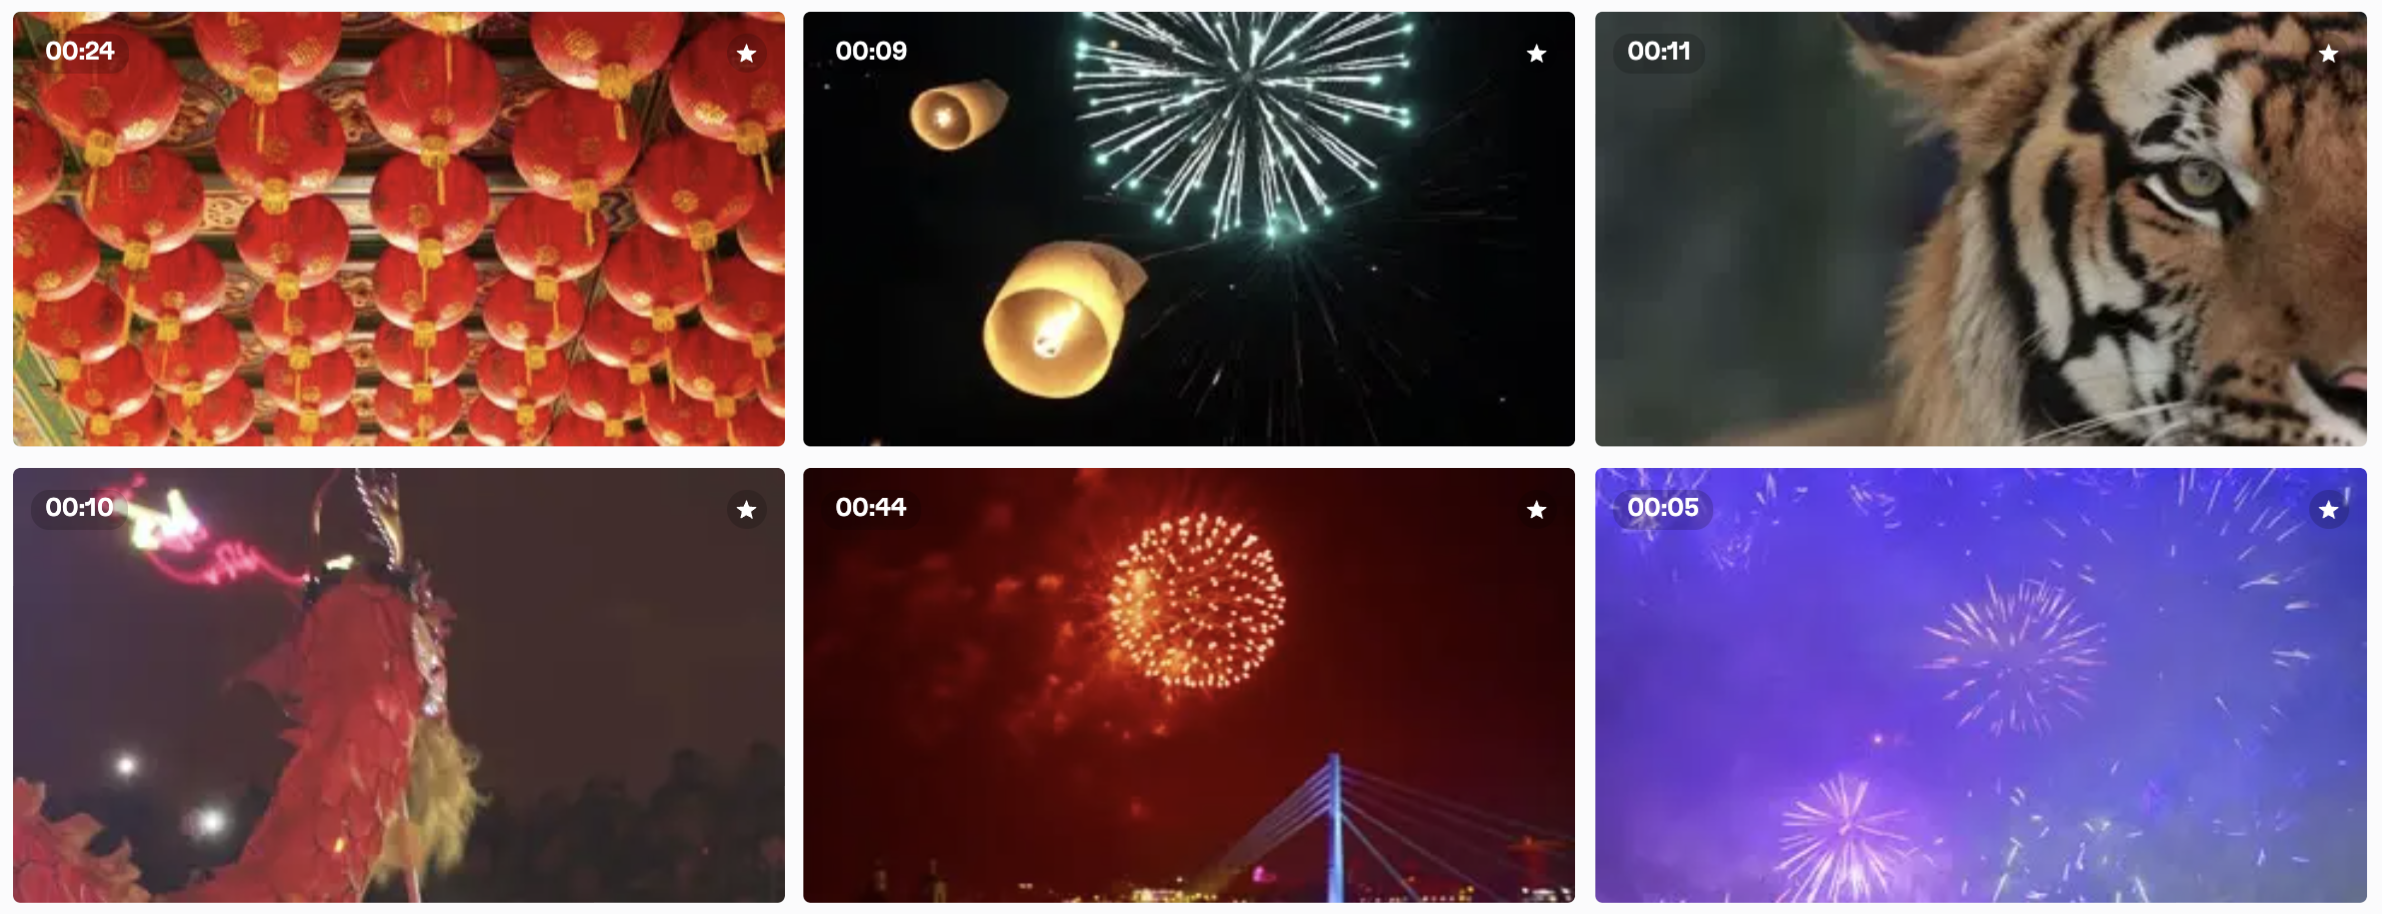 Example of Lunar new year video stock on Clipchamp